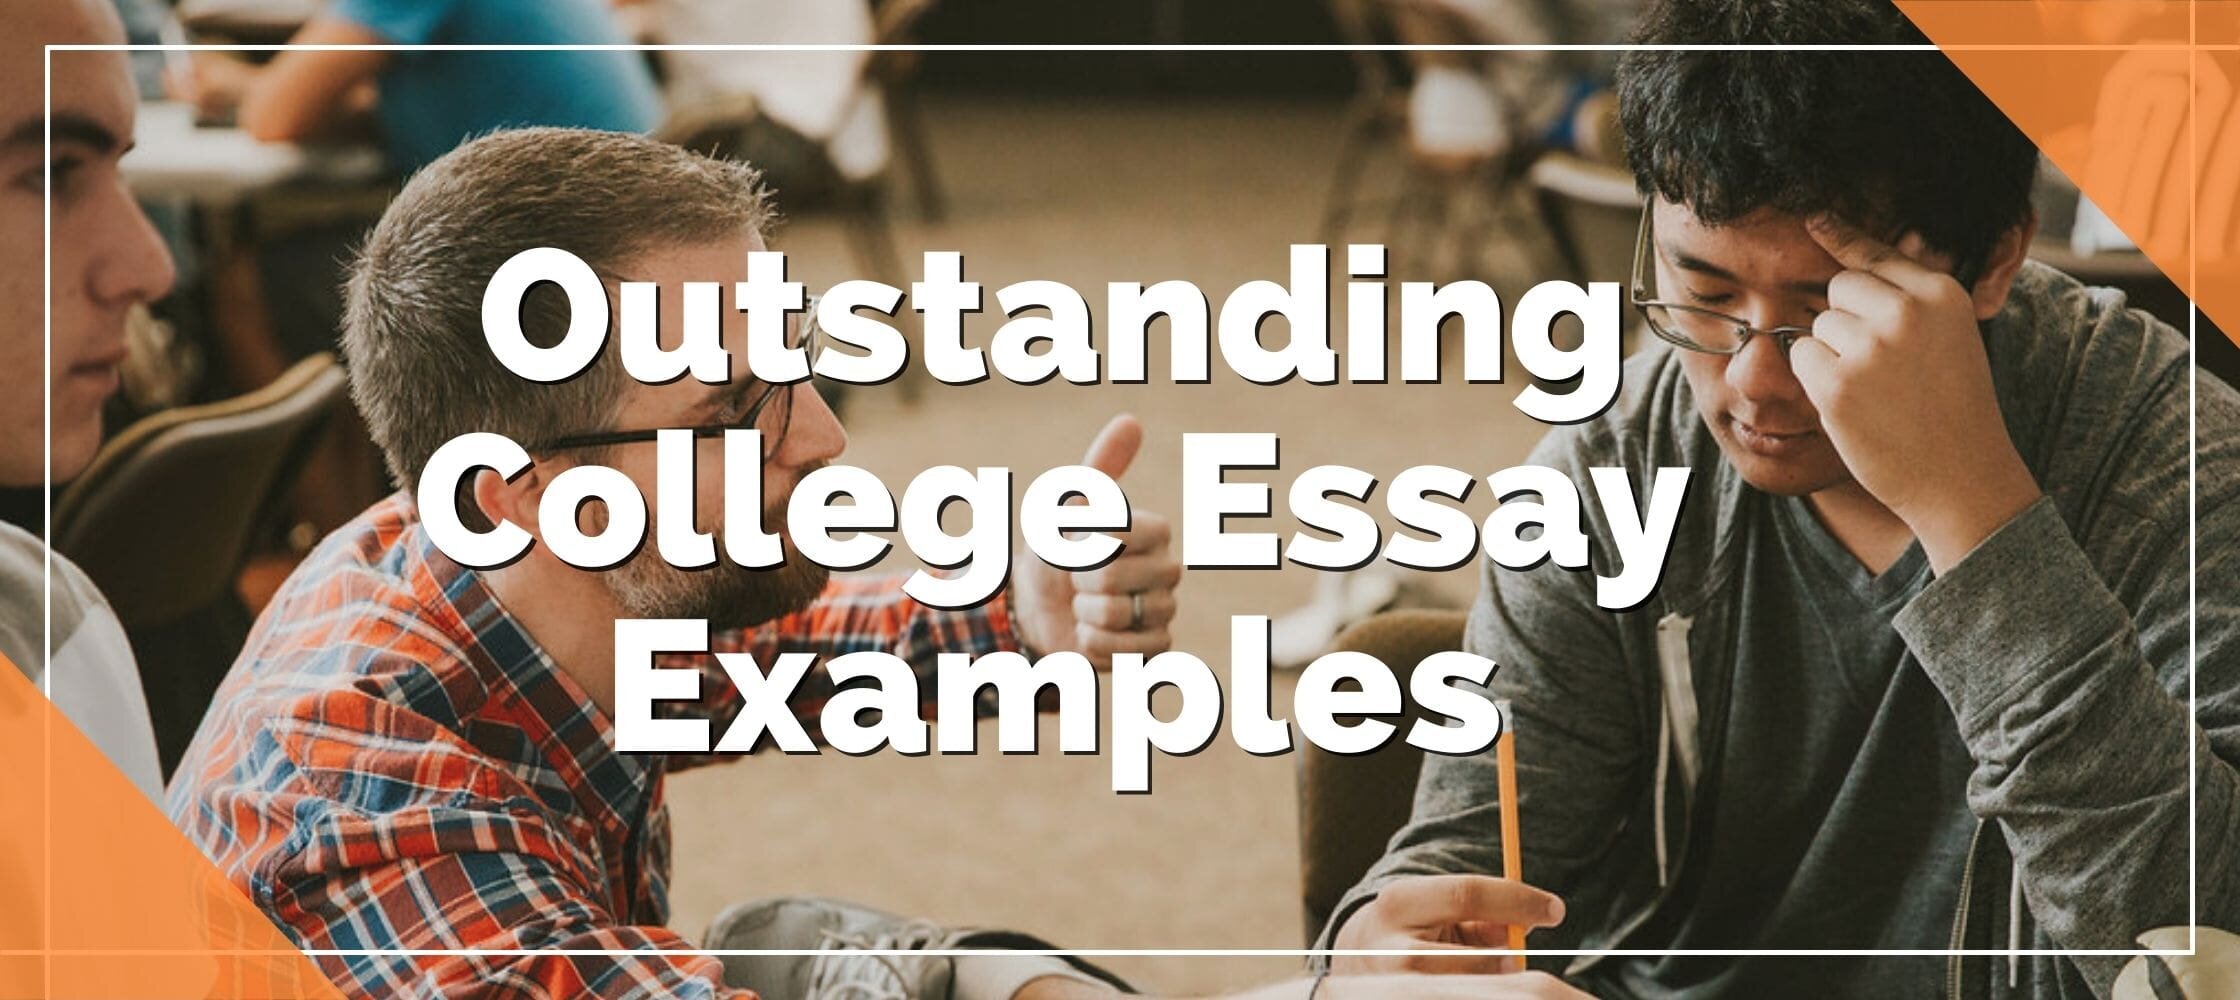 Learn how to write any college essay with these amazing examples of college essays that worked in 2019.  How was your college application journey? Let us know over at collegeessayguy.com